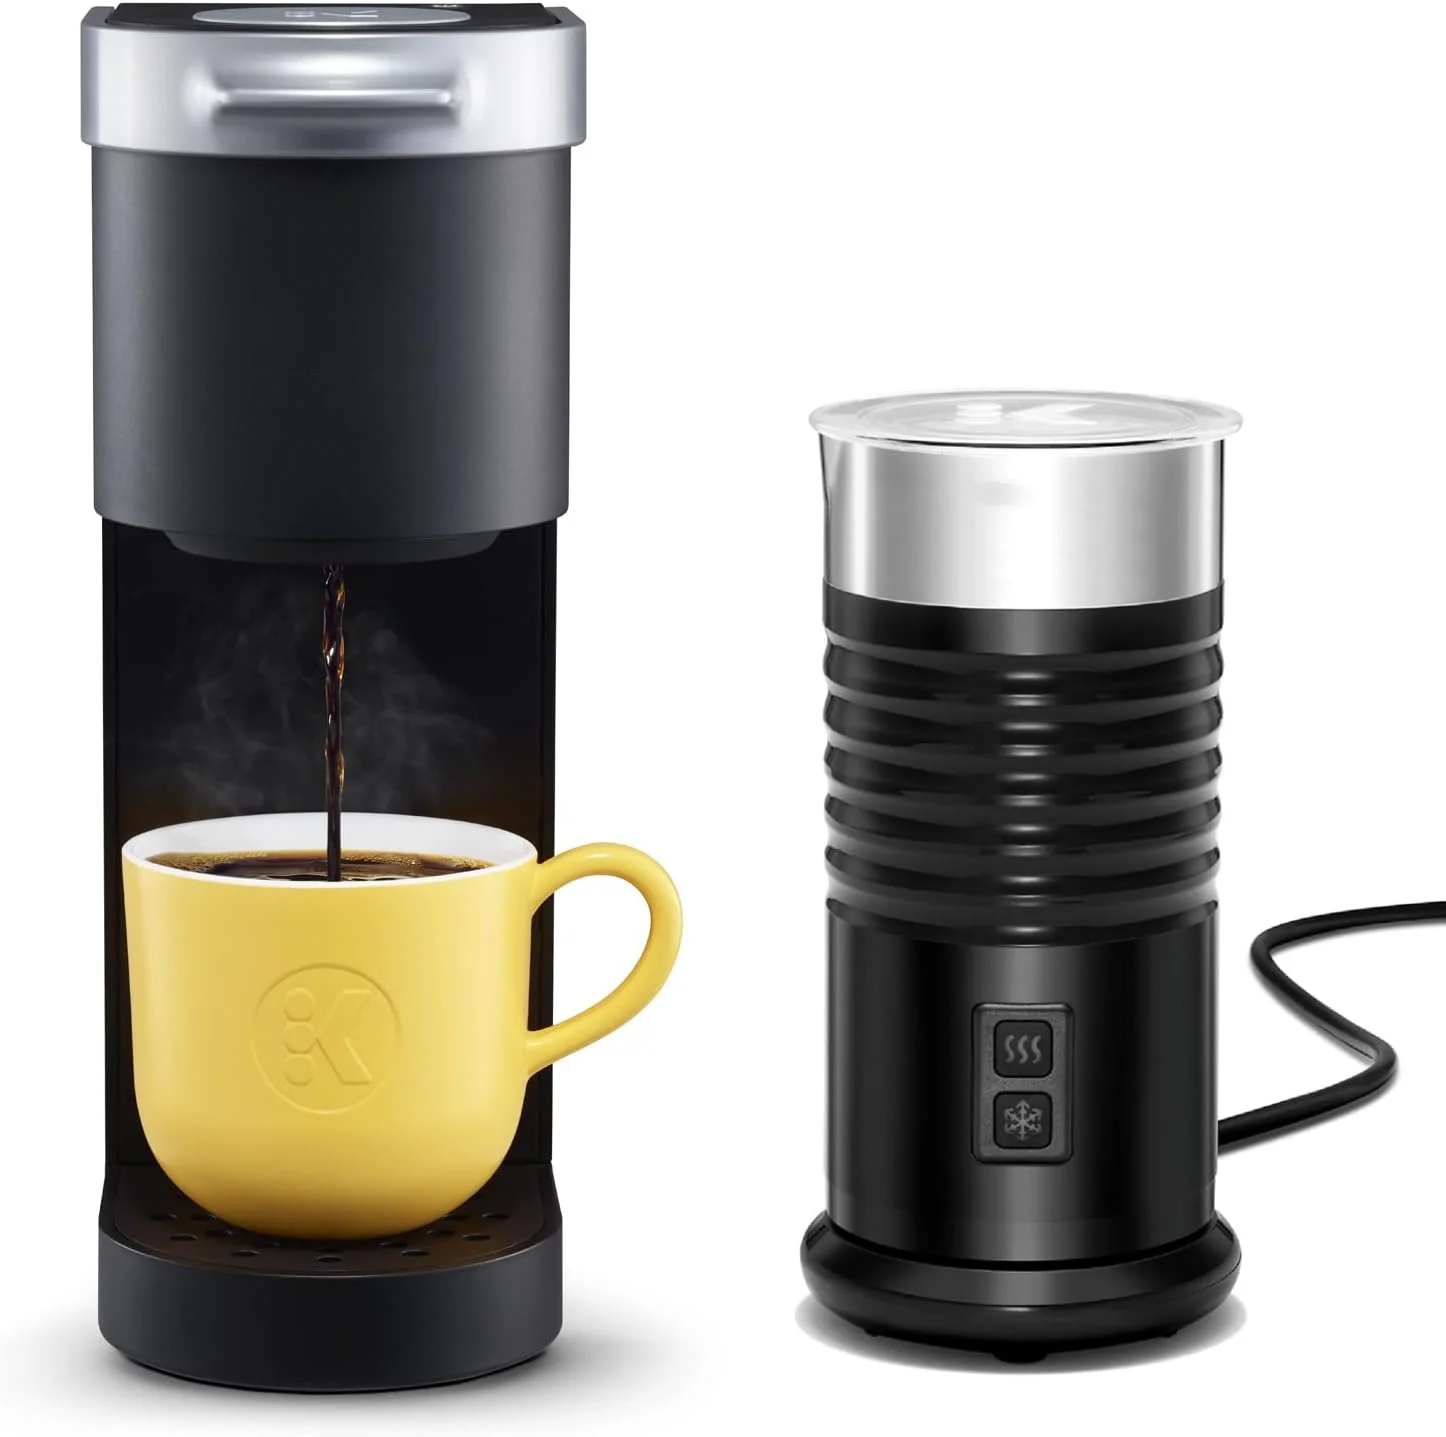 

Single-Serve K-Cup Coffee Maker, Black and Standalone Milk Frother, Black Coffee accessories Coffee maker Coffee machine Espres